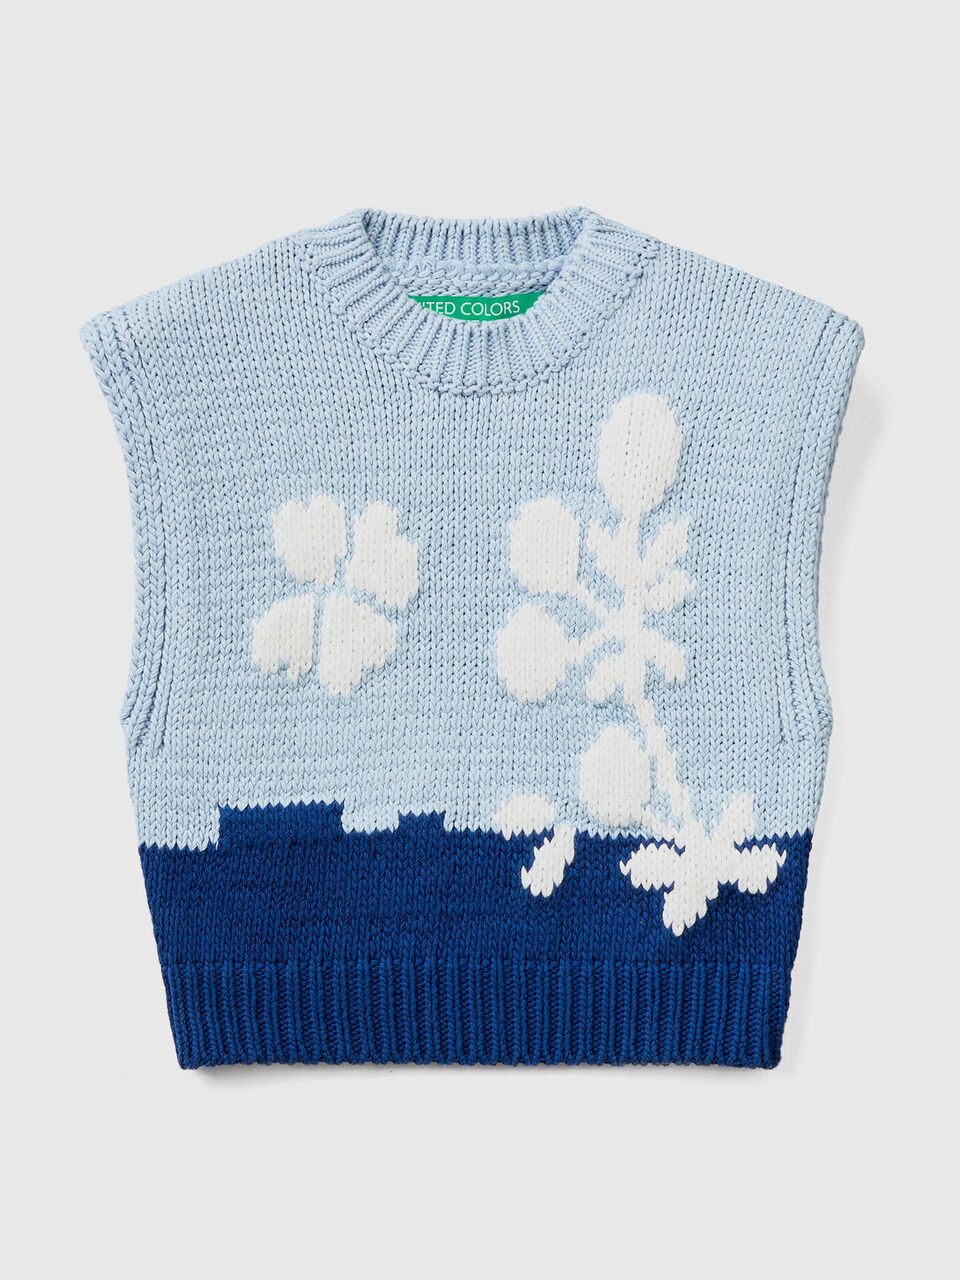 | inlay with Blue - Blue Benetton floral vest